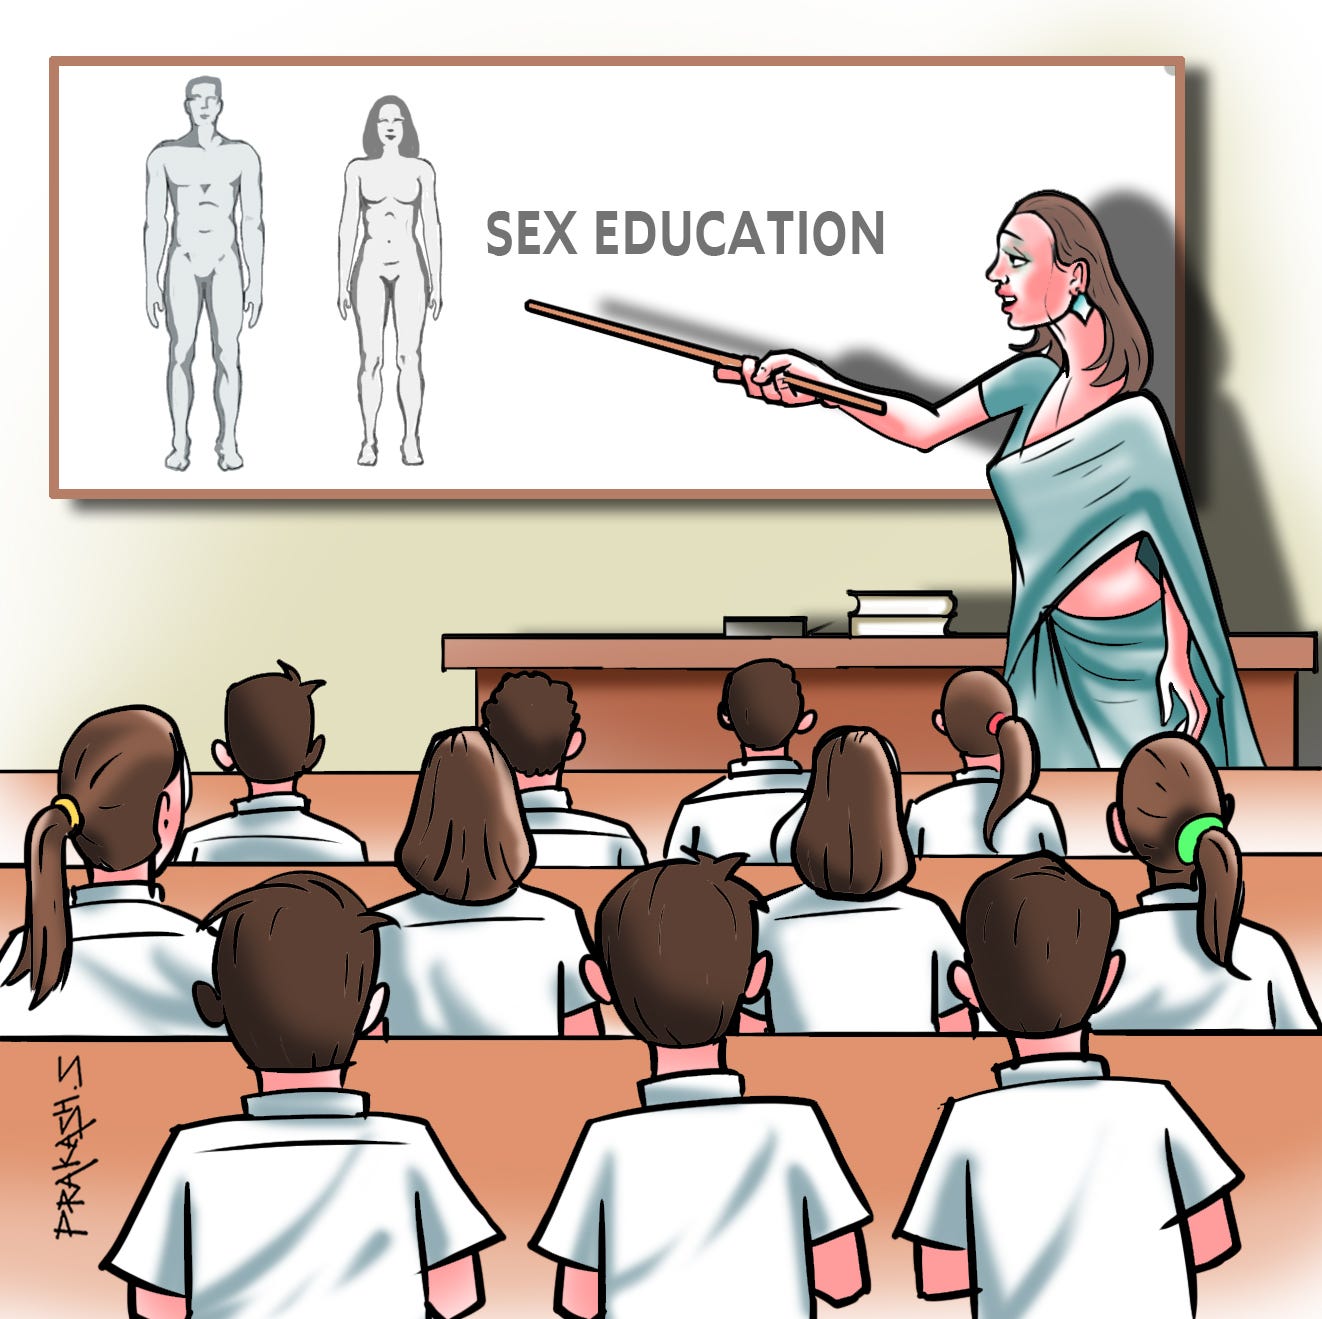 School Lessons: Sex in the World Today